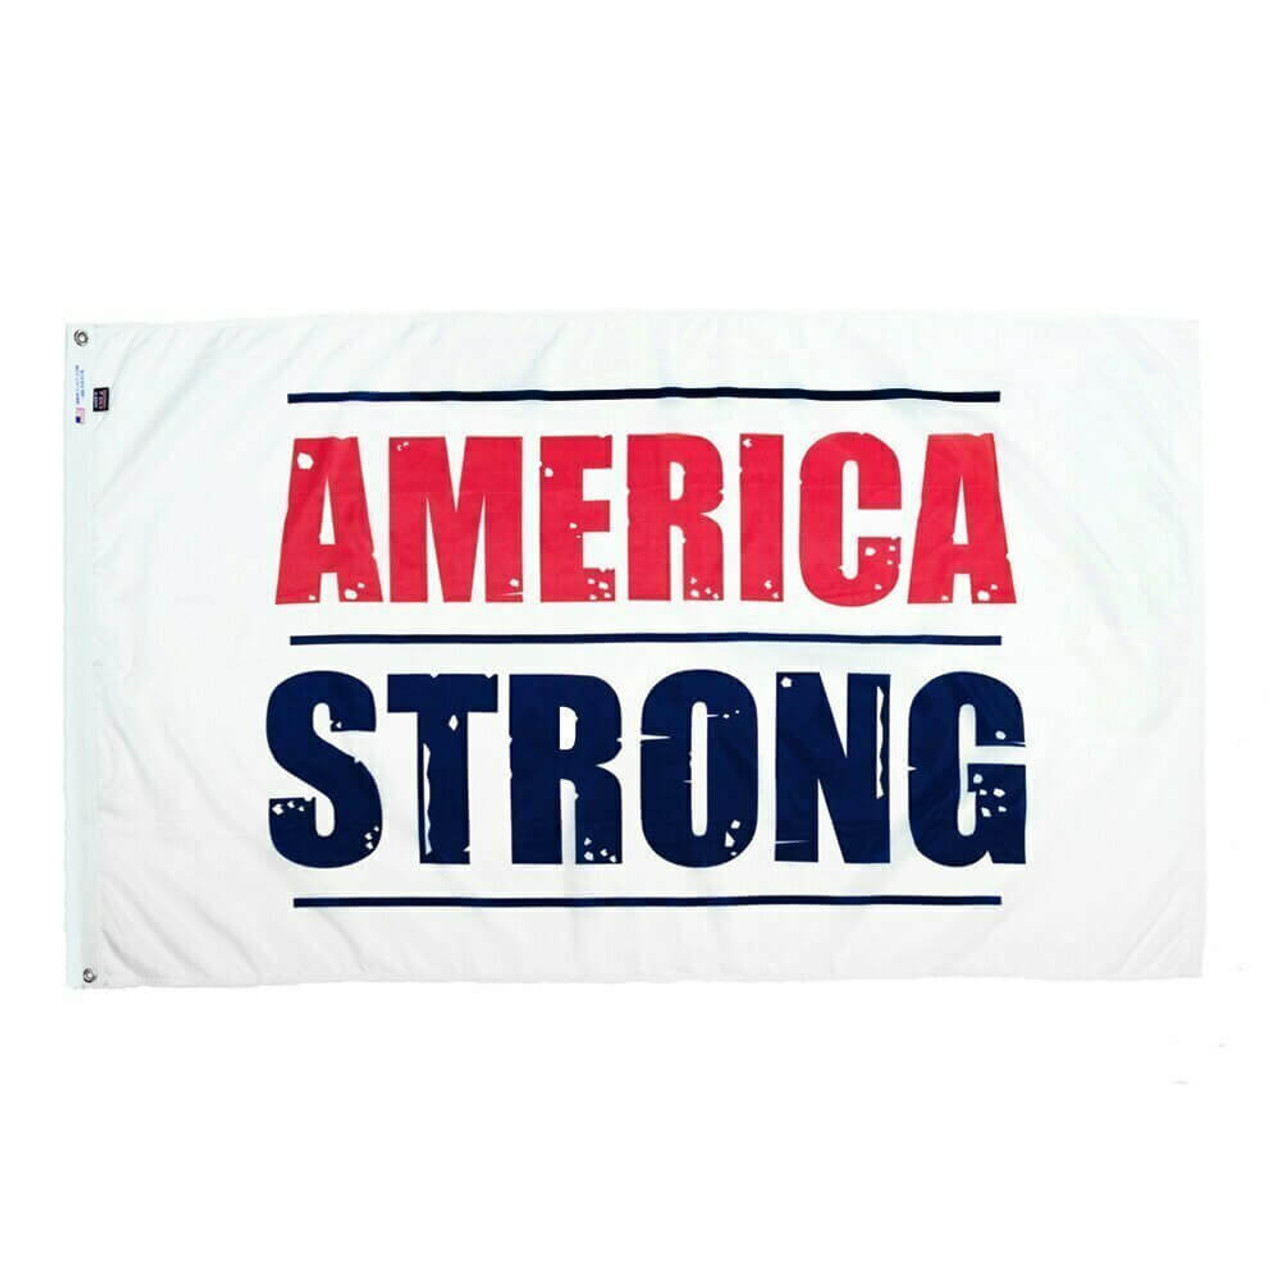 A nylon white flag that says AMERICA is STRONG in all capital letters. The word AMERICA is red and is above the word STRONG is blue.